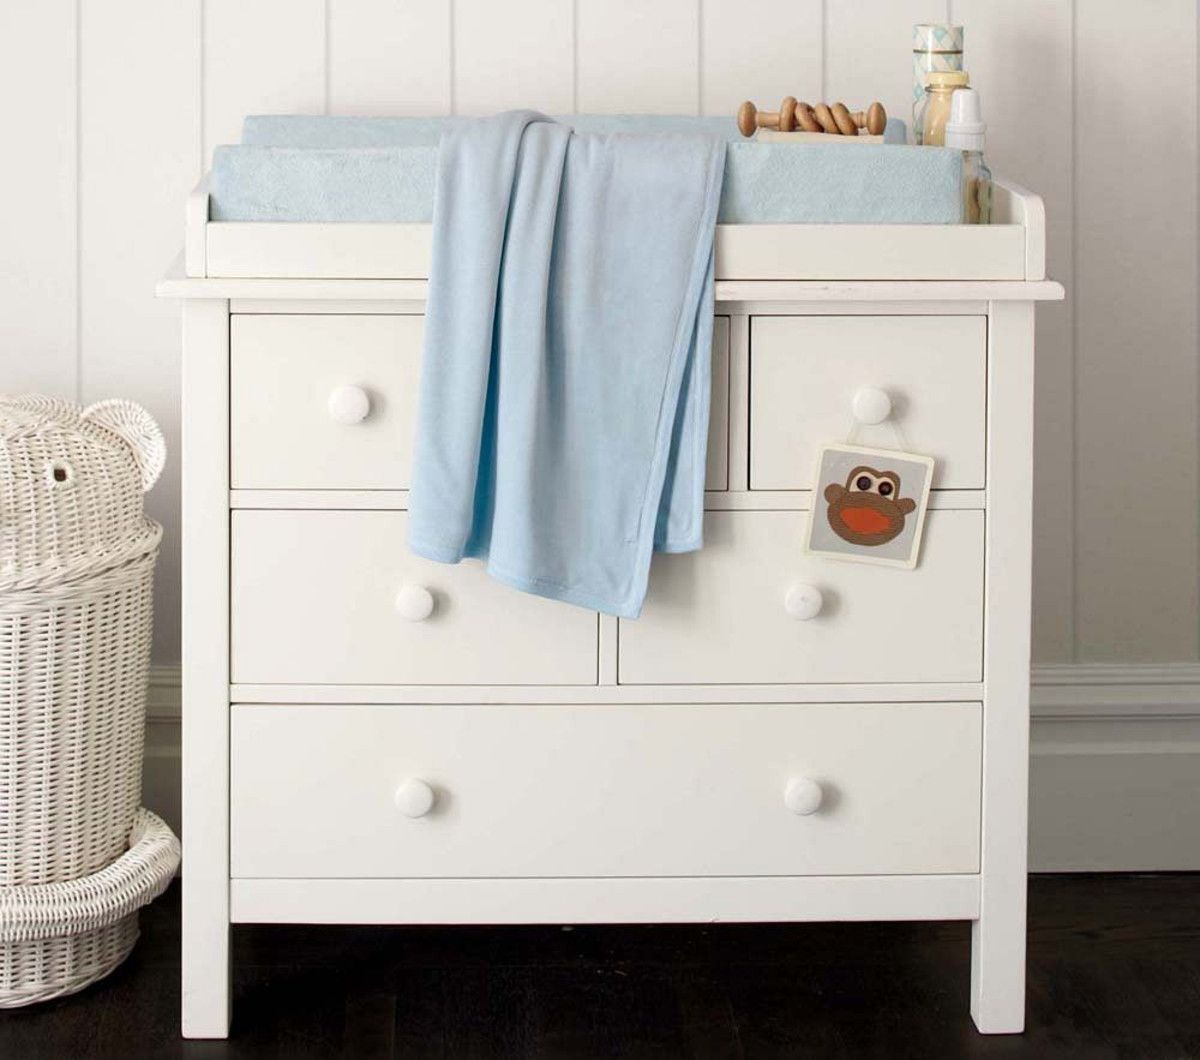 2. Changing table